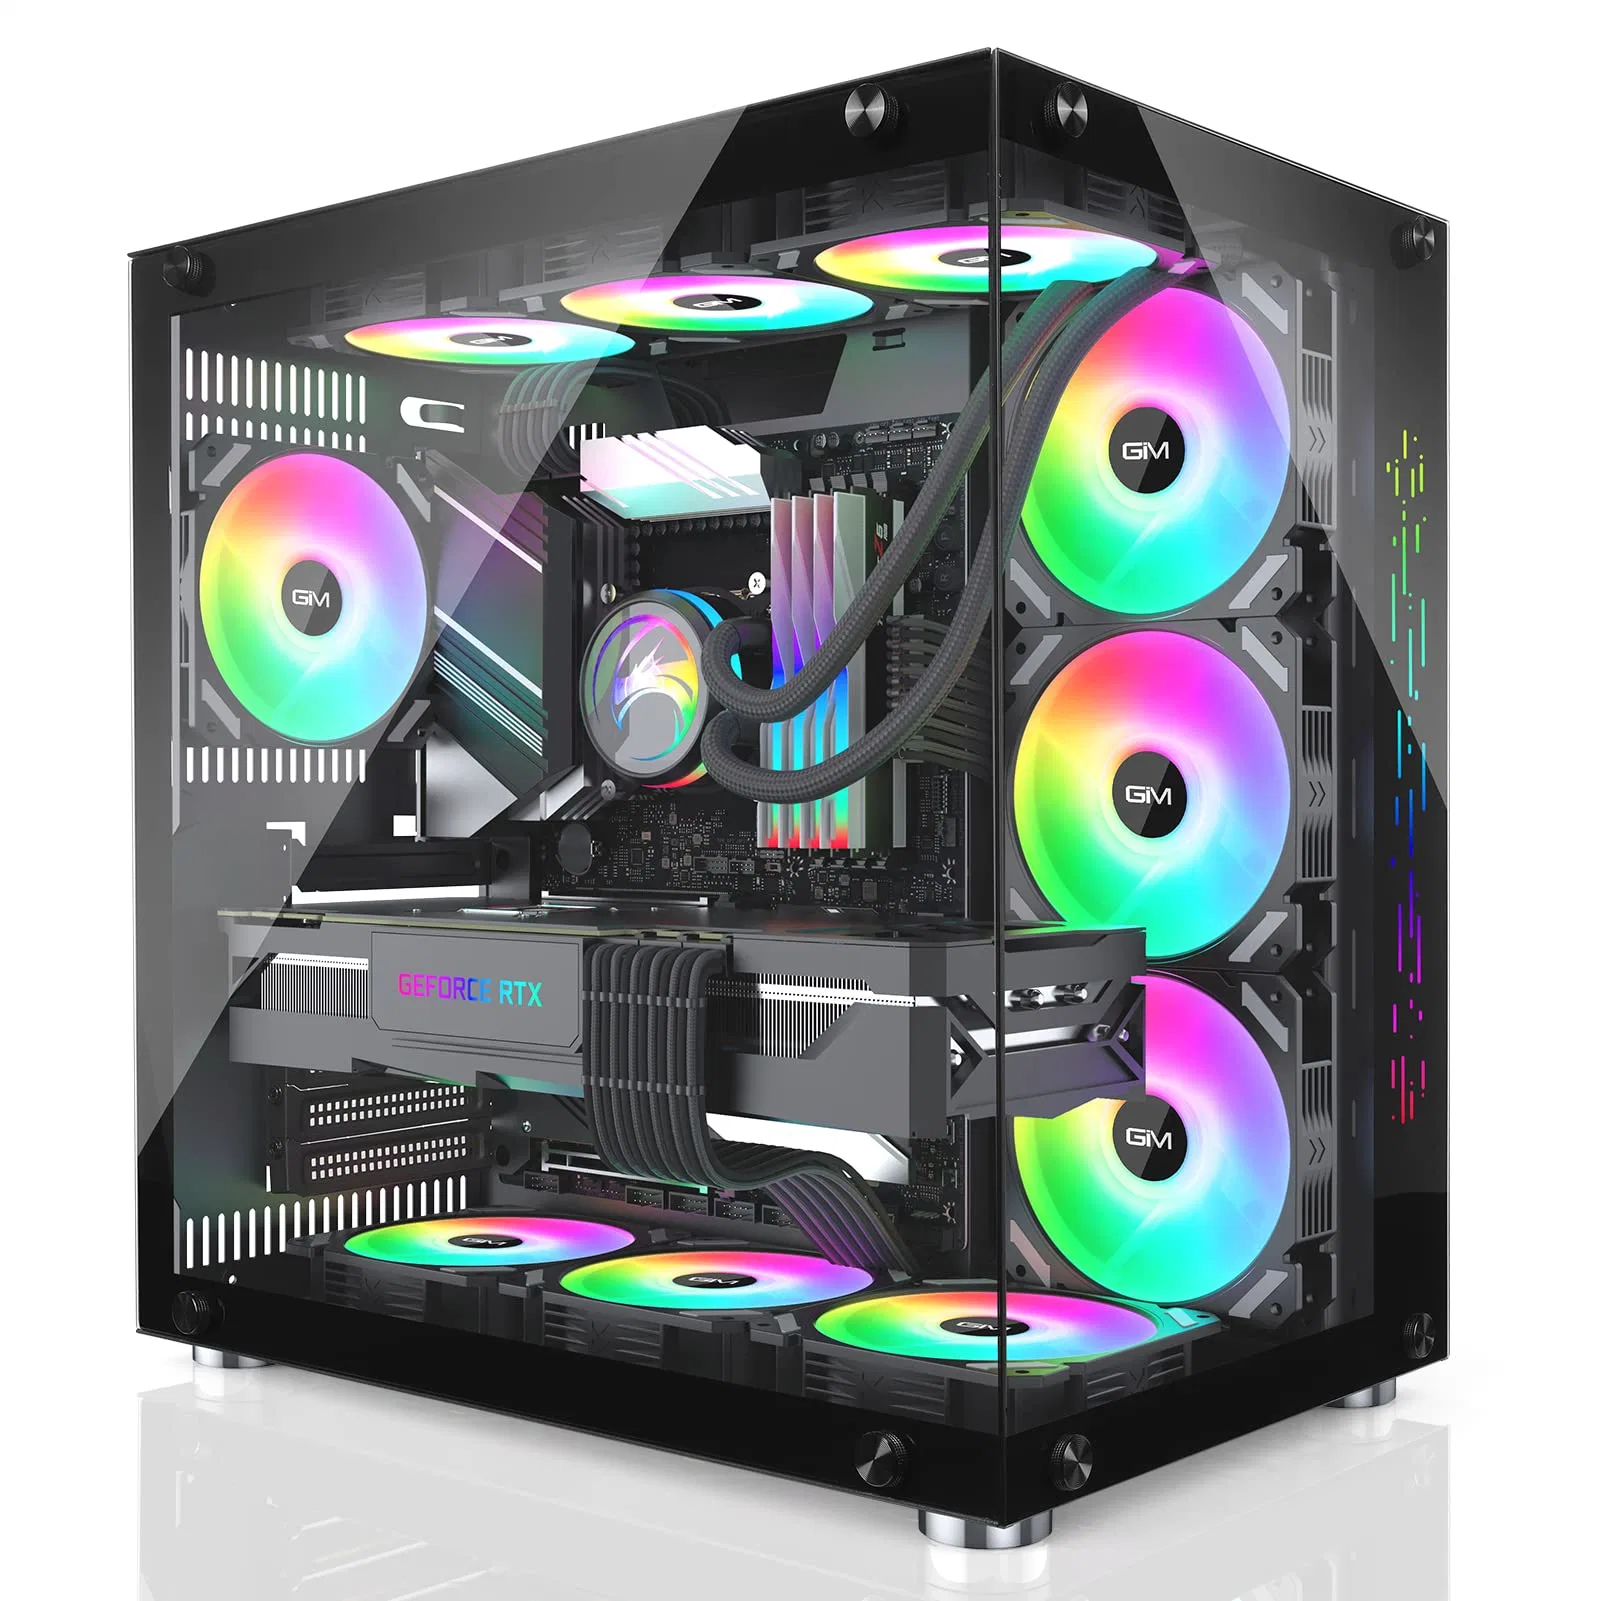 Gim ATX MID-Tower PC Case Black 10 Pre-Installed 120mm RGB Fans Gaming PC Case 2 Tempered Glass Panels Gaming Style Windows Computer & Desktop Case USB 3.0 I/O